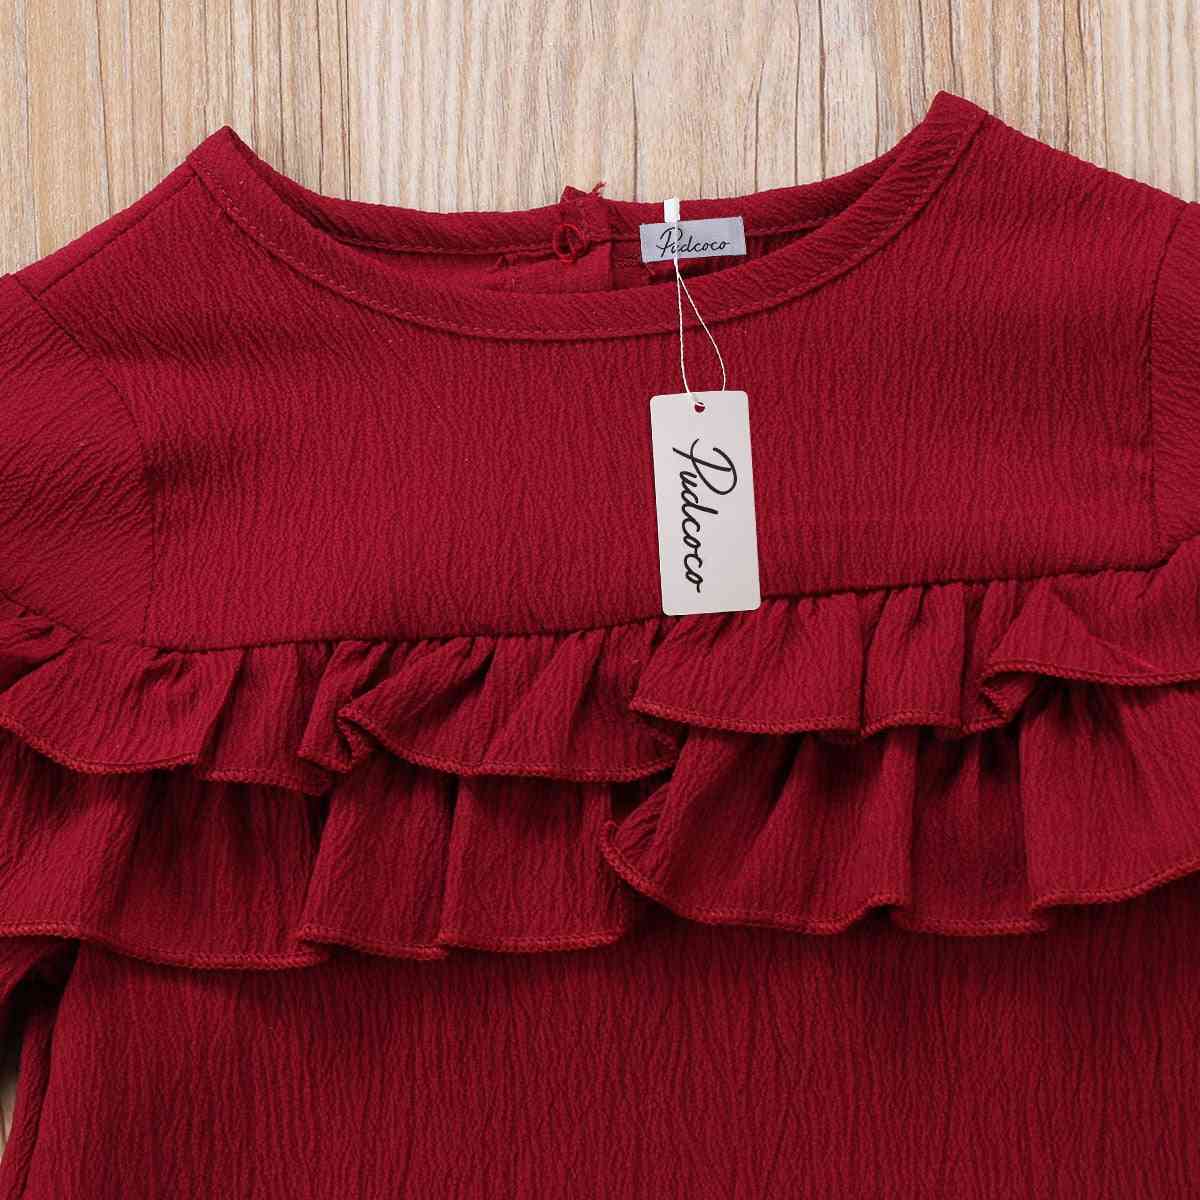 Infant Baby Girl Cotton Ruffles Long Sleeve Blouse Shirt / Tops Clothes